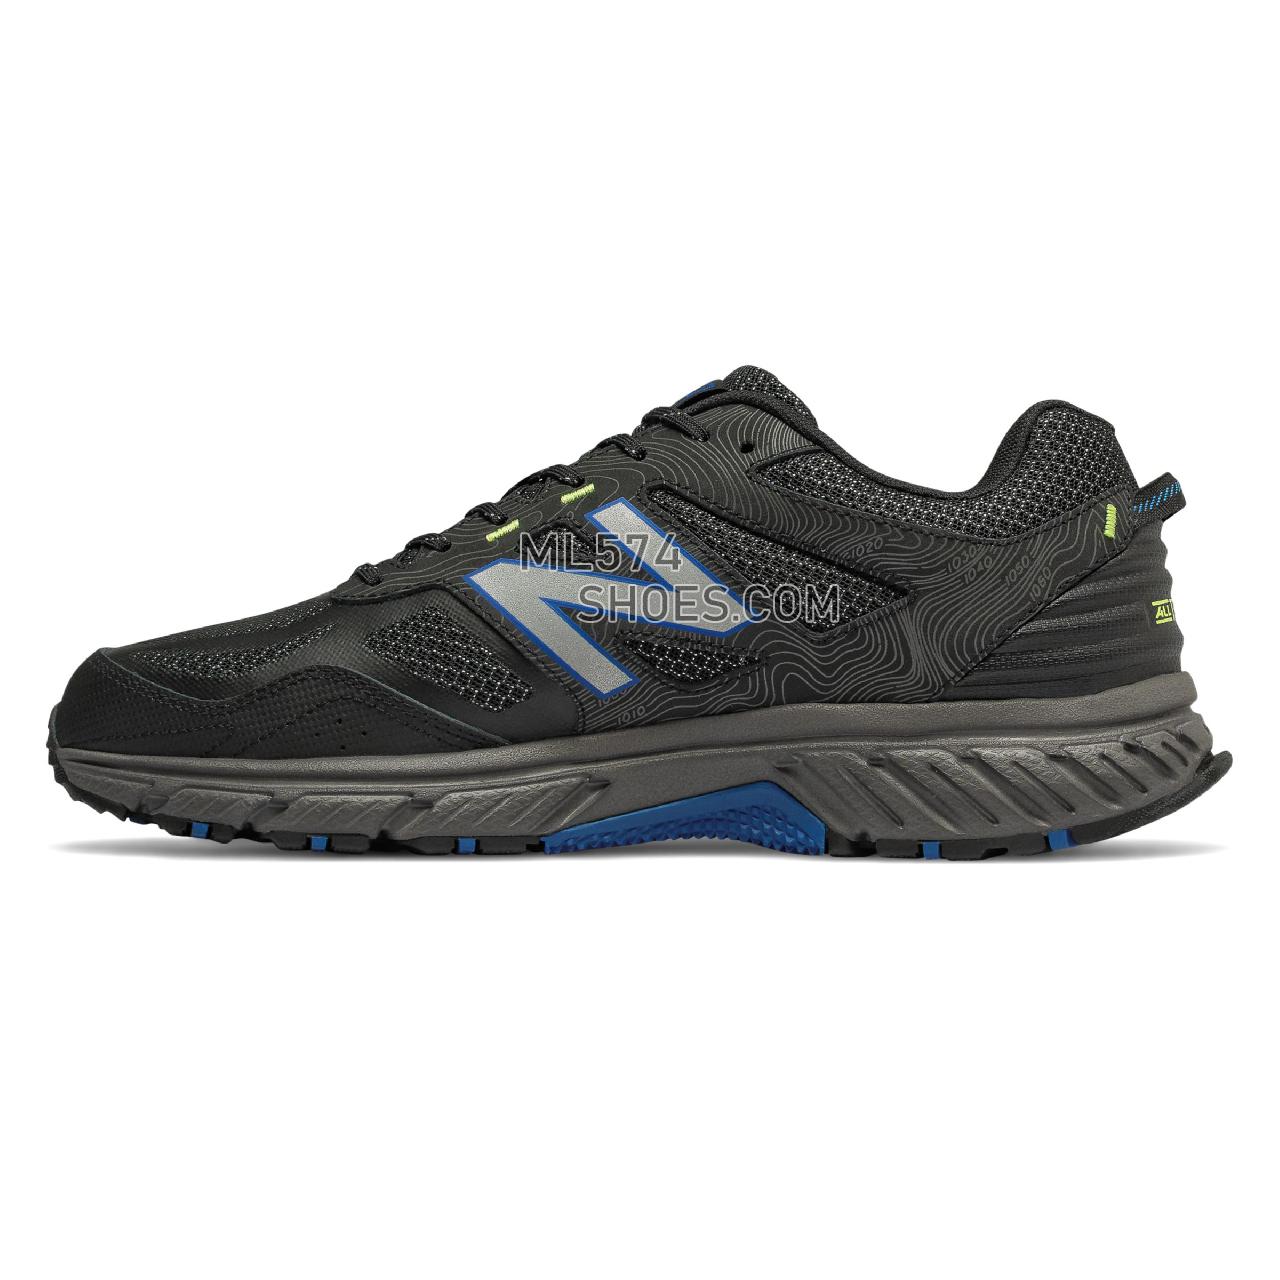 New Balance 510v4 Trail - Men's 510 - Running Magnet with Black and Lake Blue - MT510CR4